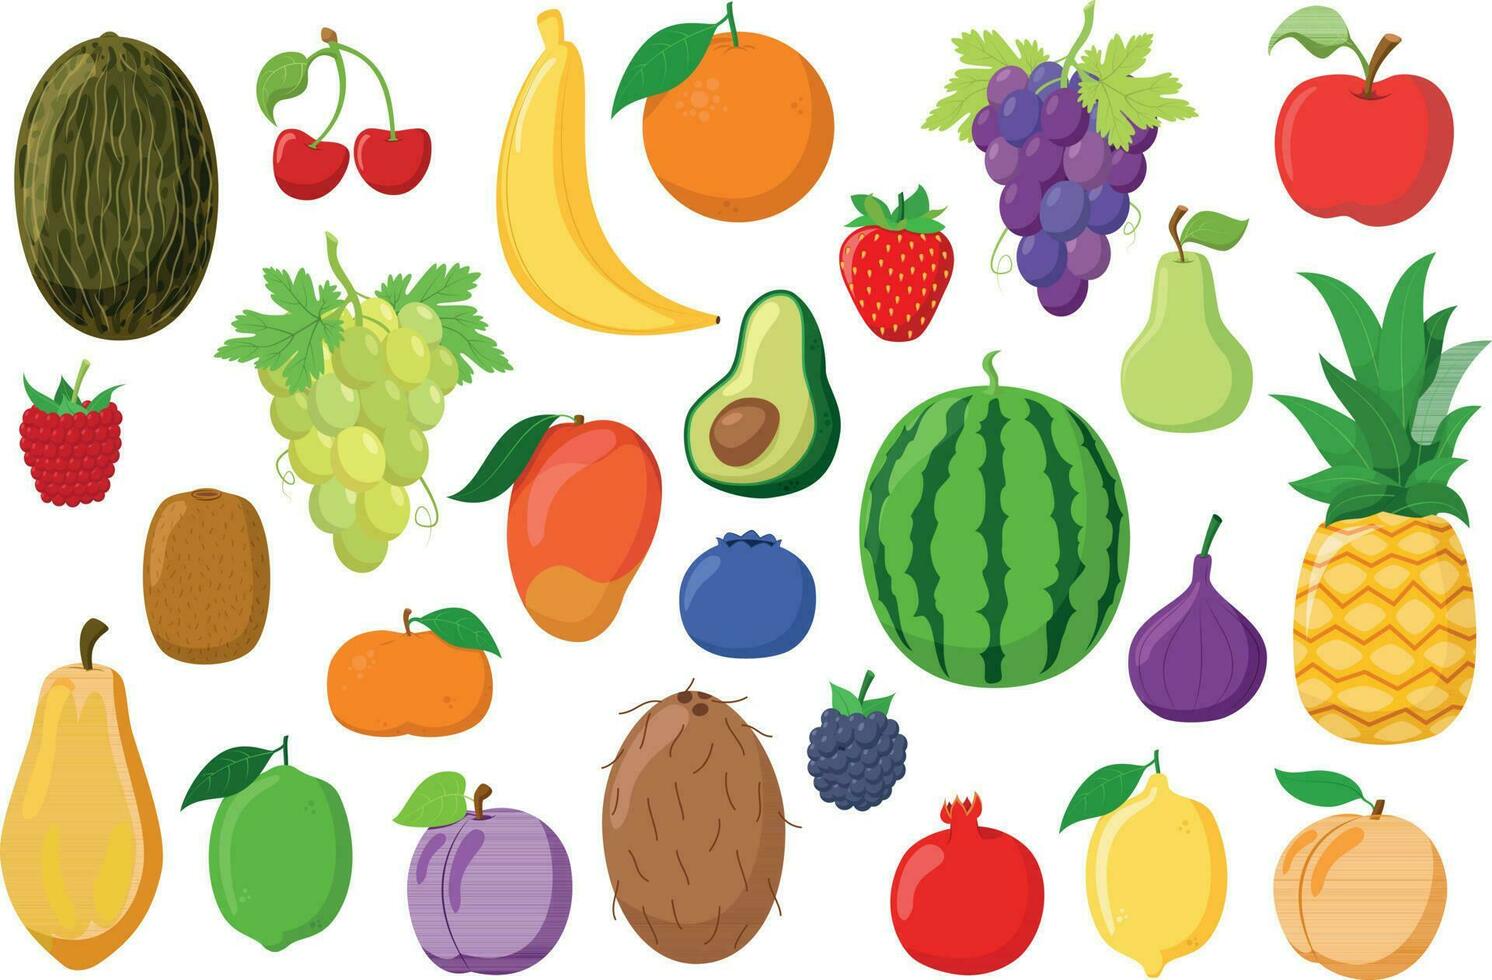 Fruits Collection. Set of 26 different fruits in cartoon style Vector illustration